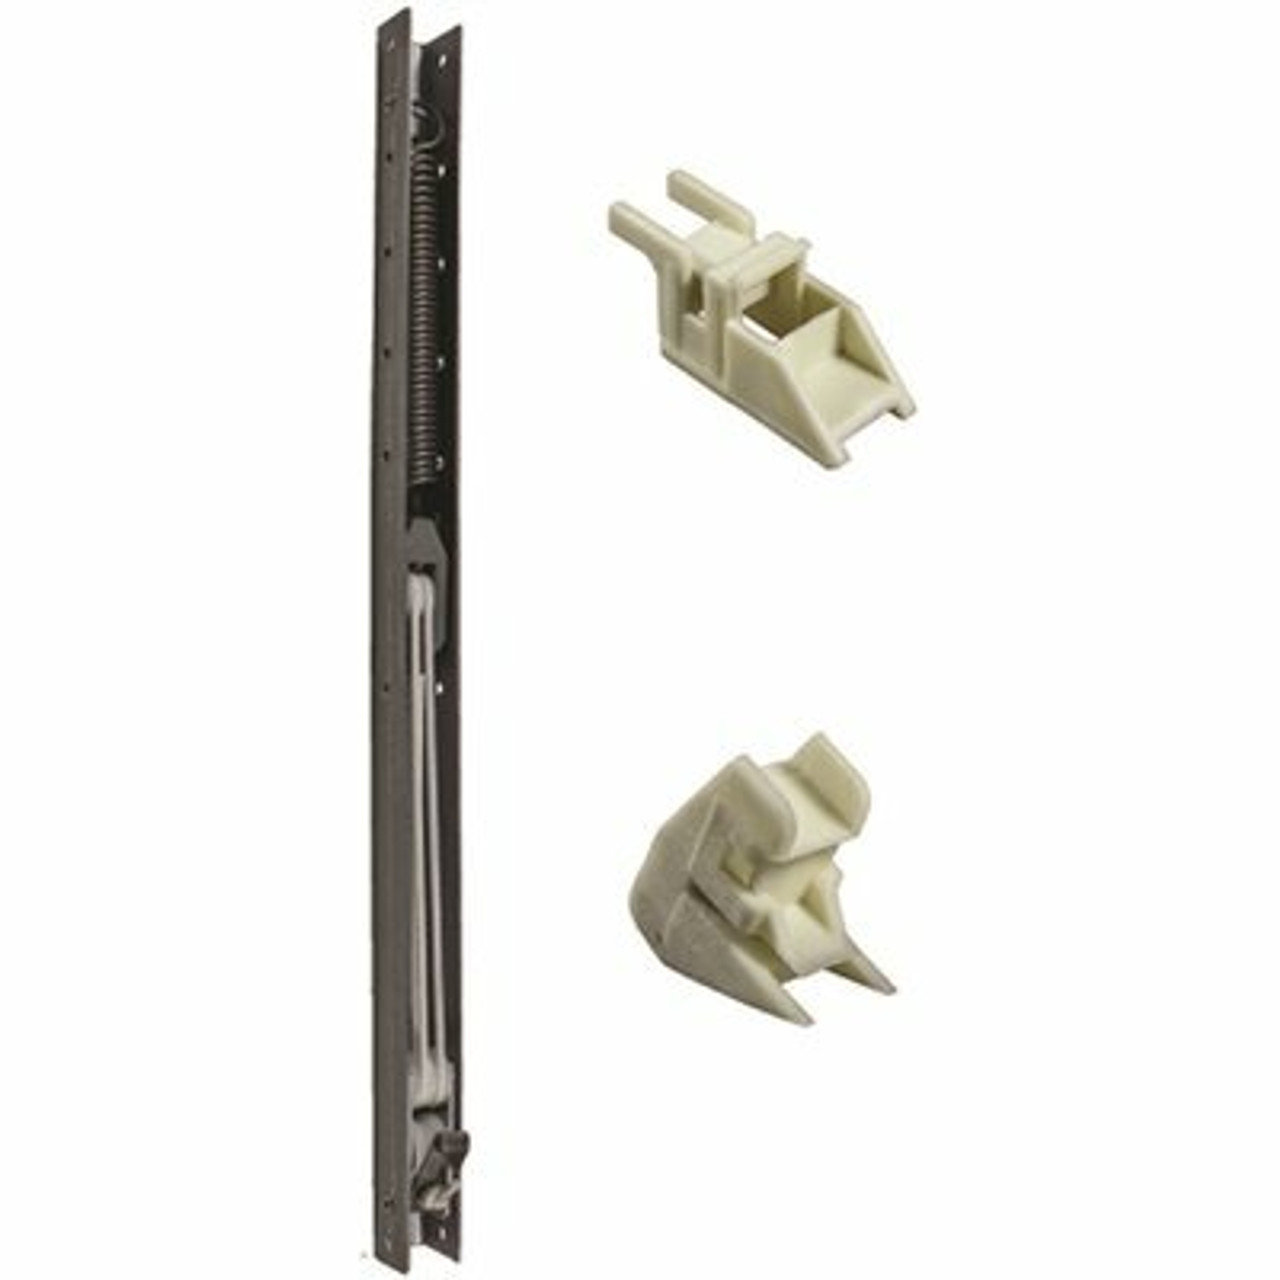 29 In. L Window Channel Balance 2860 With Top And Bottom End Brackets Attached 9/16 In. W X 5/8 In. D (Pack Of 6)